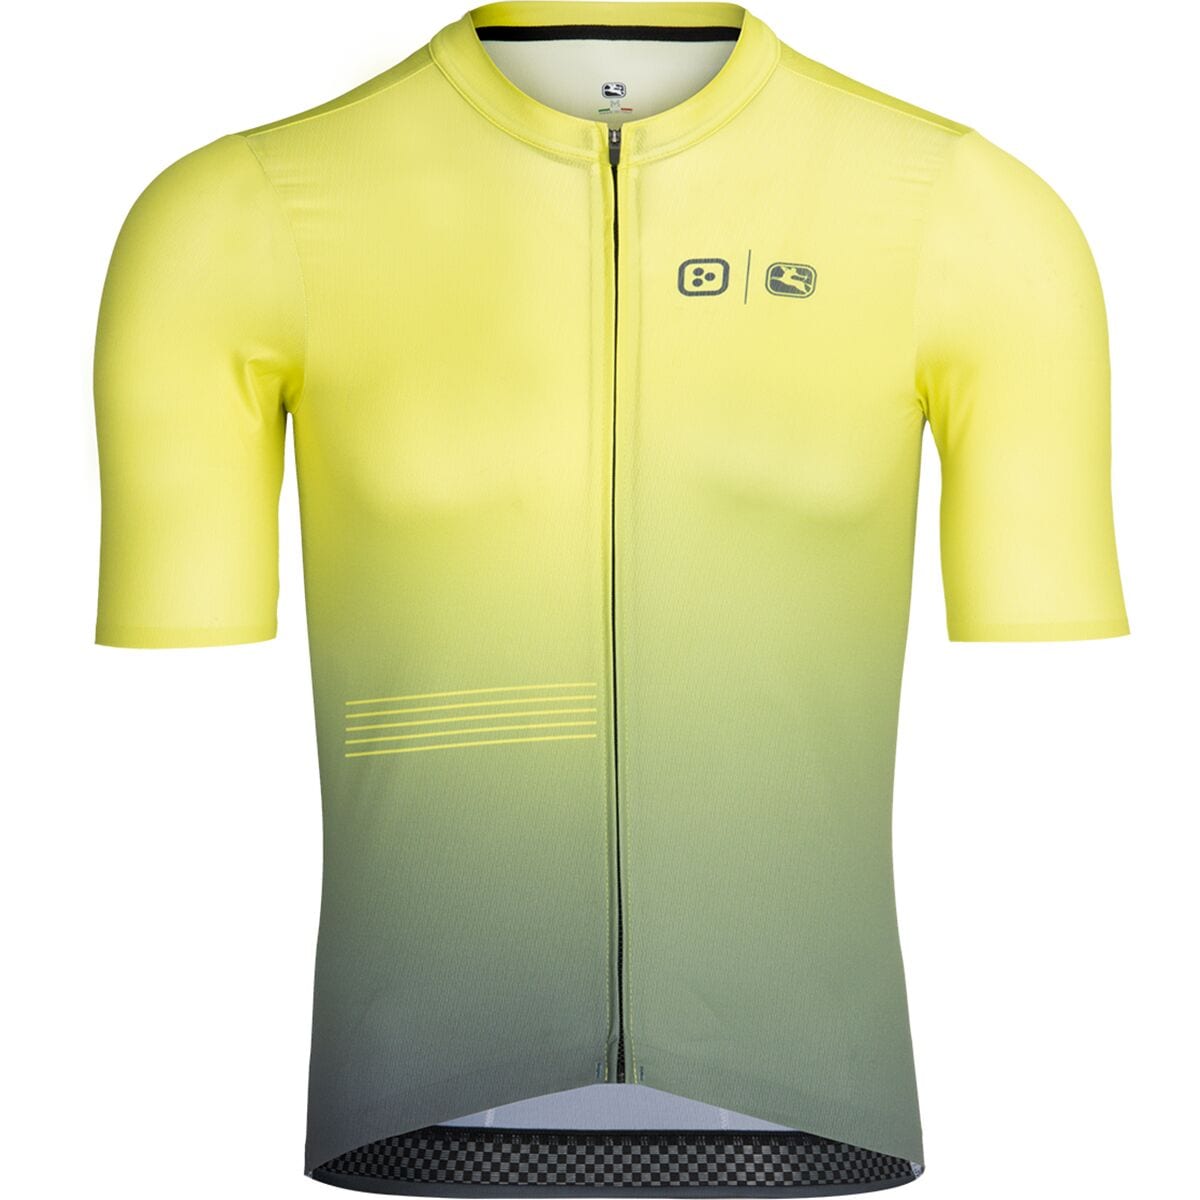 Competitive Cyclist Race Day Short-Sleeve Jersey - Men's Electric Lime, S